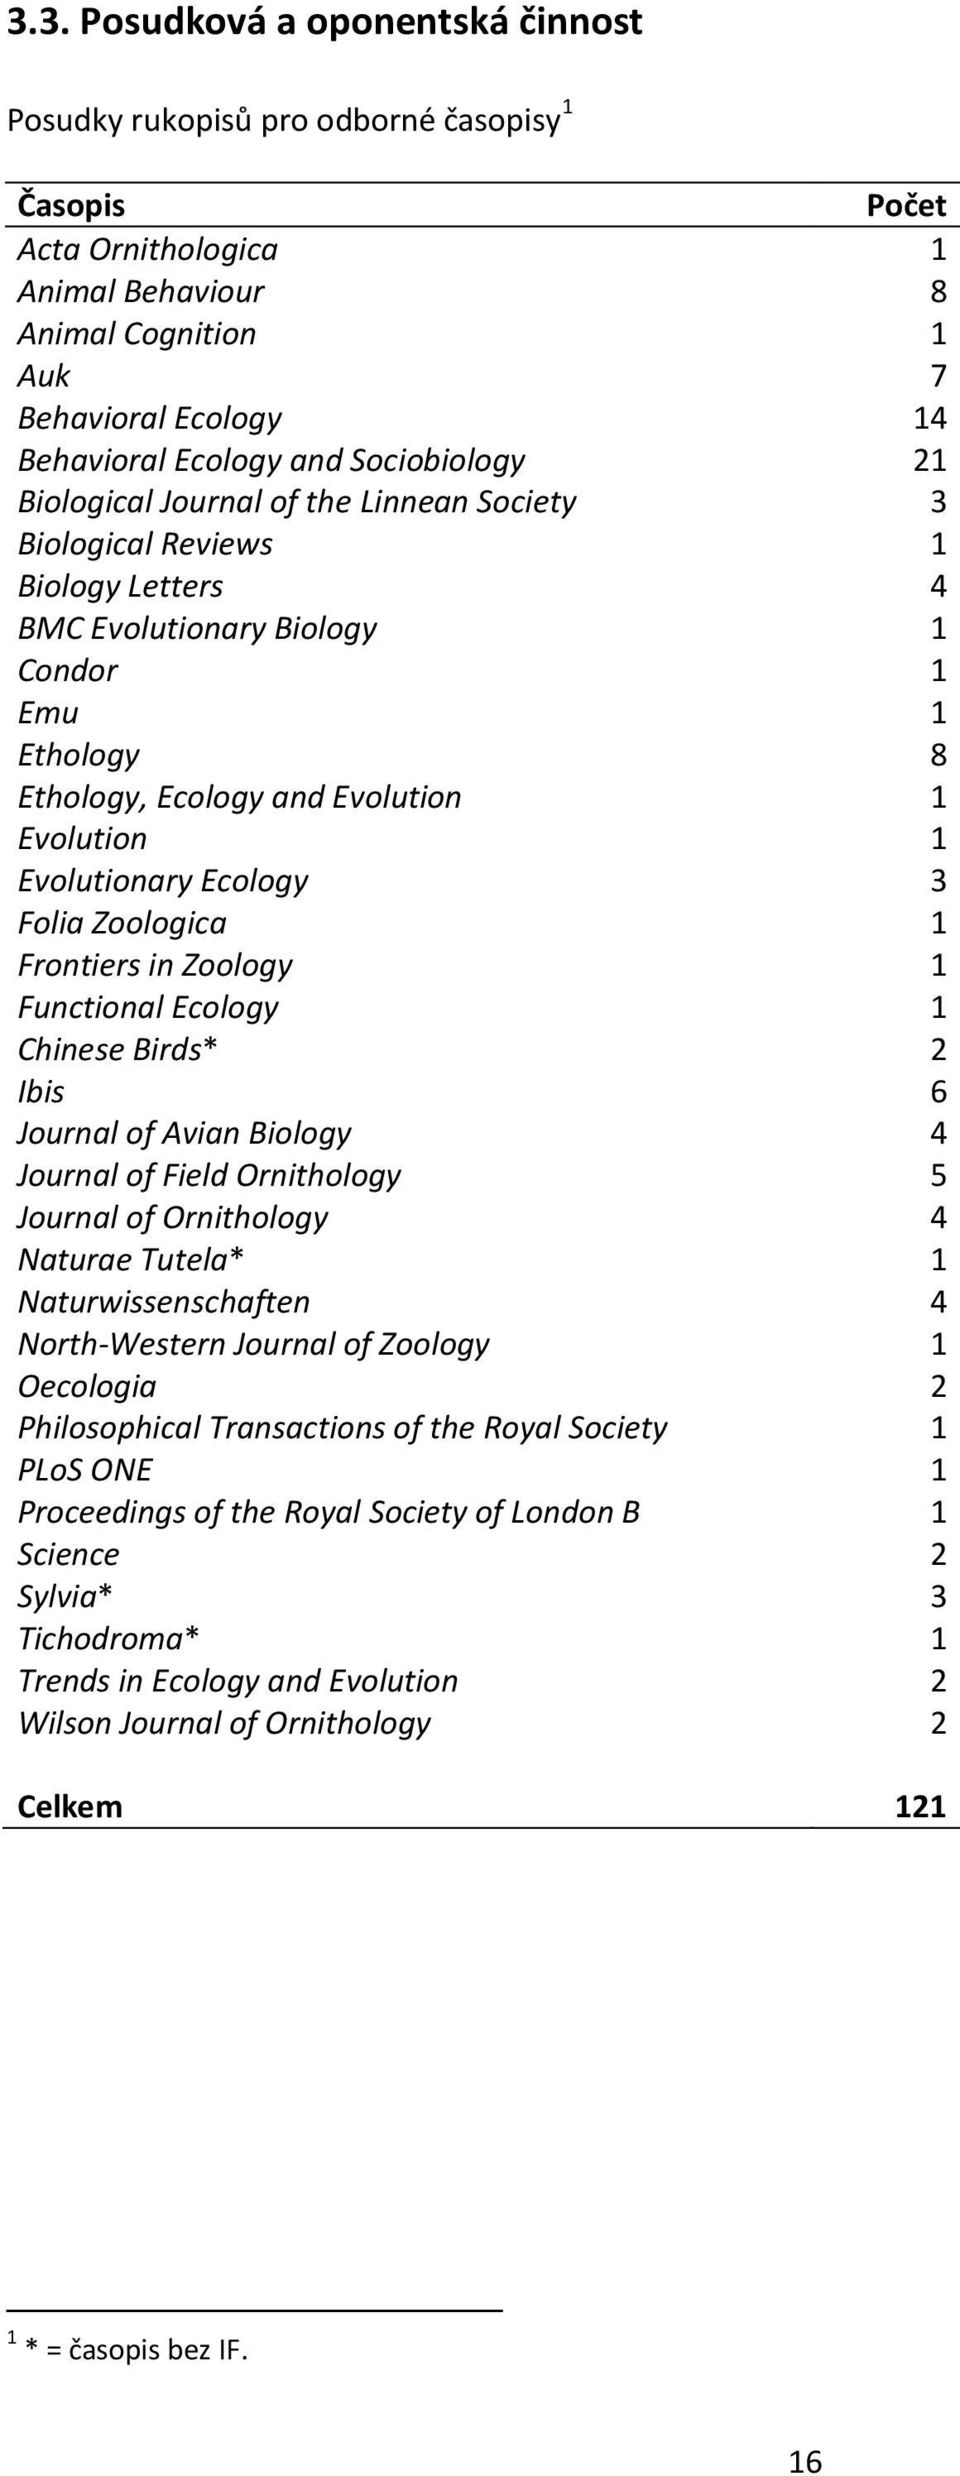 Evolutionary Ecology 3 Folia Zoologica 1 Frontiers in Zoology 1 Functional Ecology 1 Chinese Birds* 2 Ibis 6 Journal of Avian Biology 4 Journal of Field Ornithology 5 Journal of Ornithology 4 Naturae